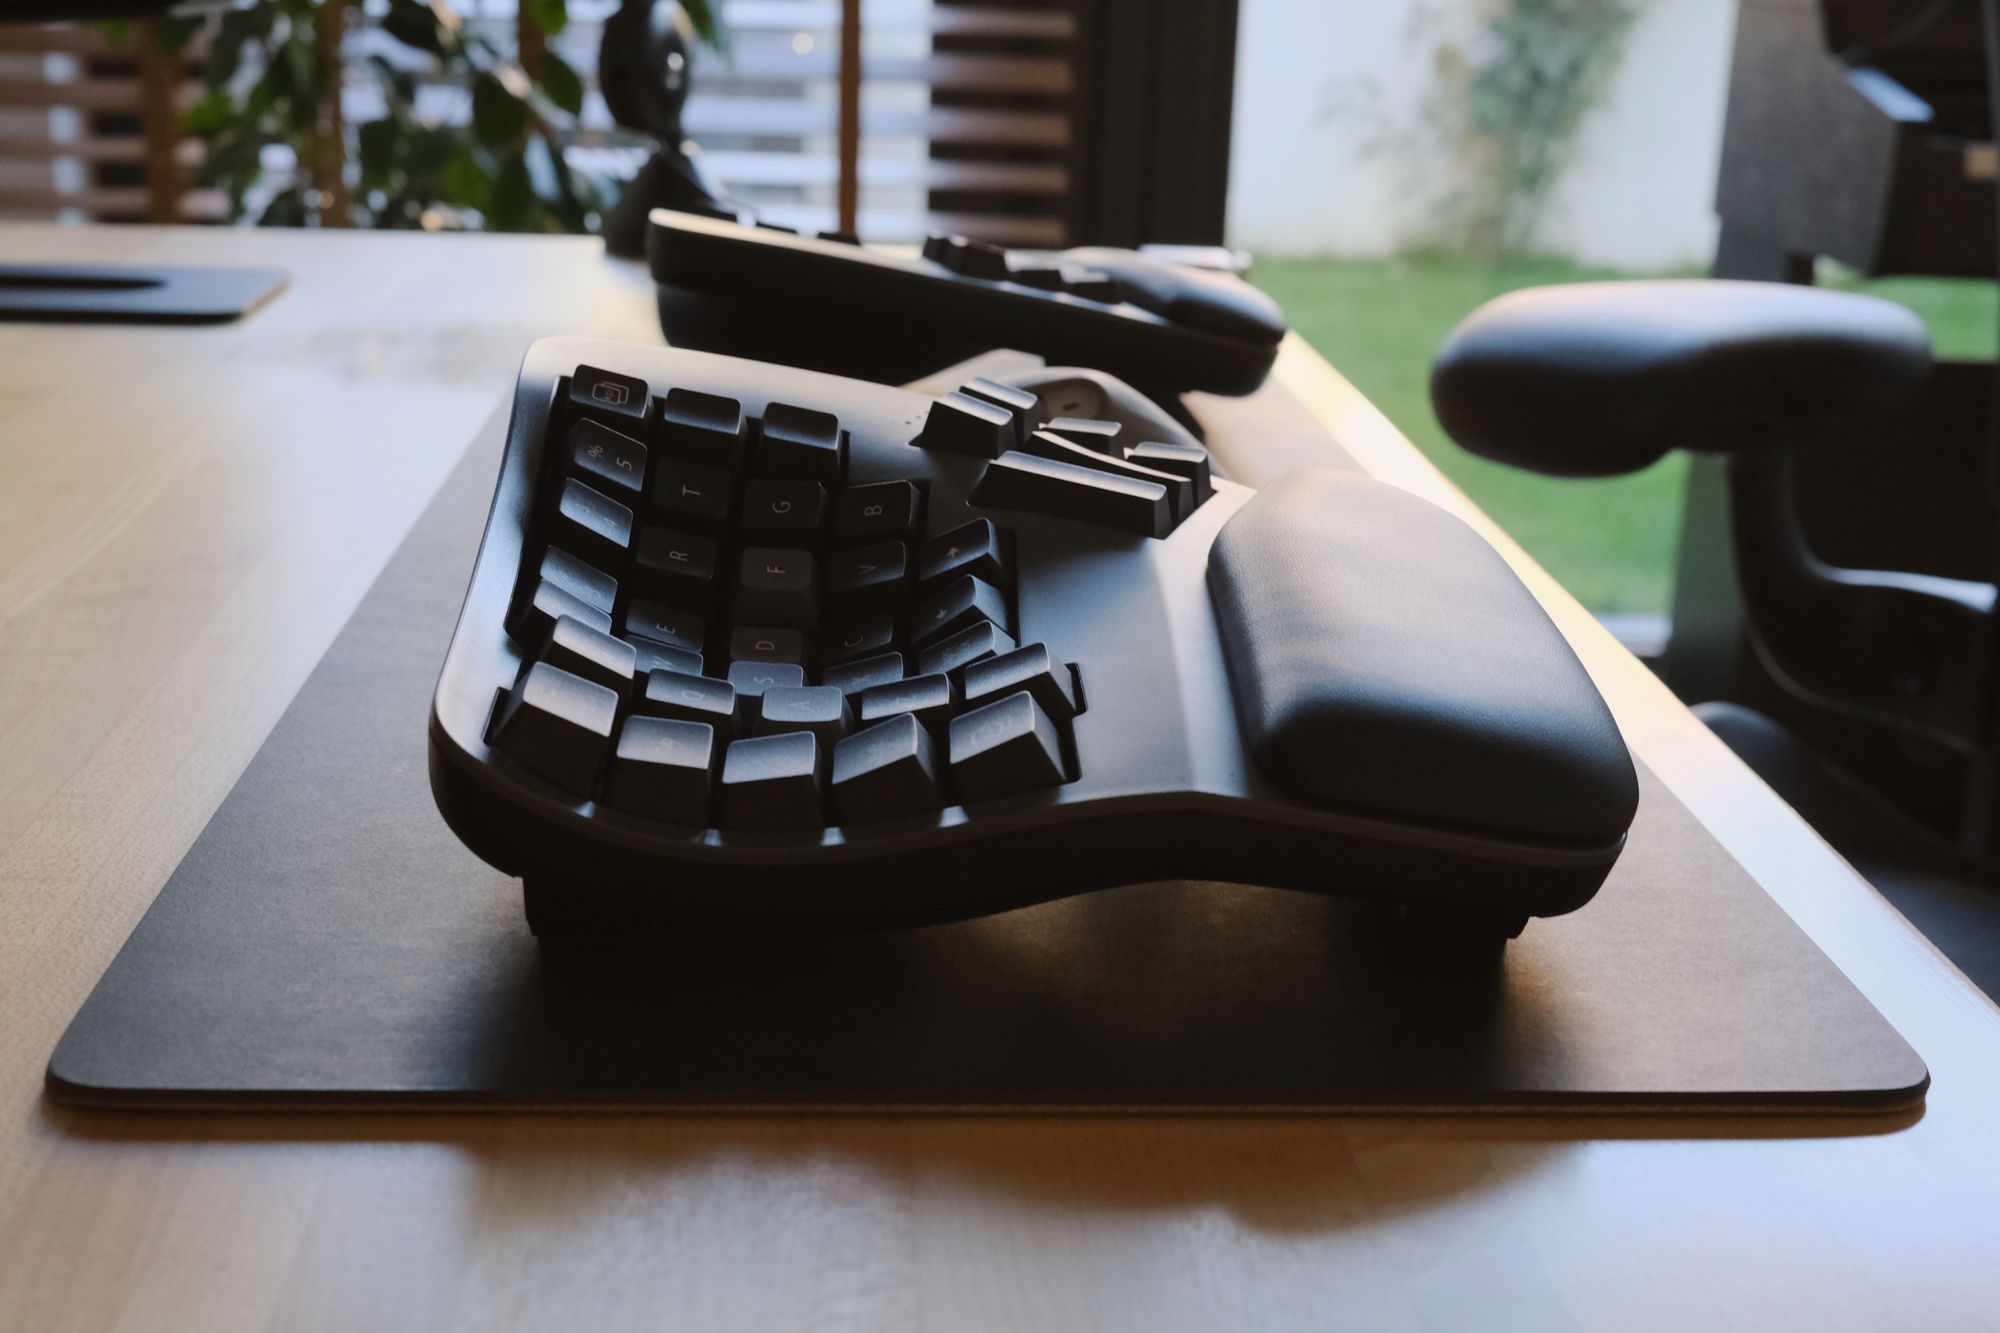 Review of the Kinesis Advantage360 Professional